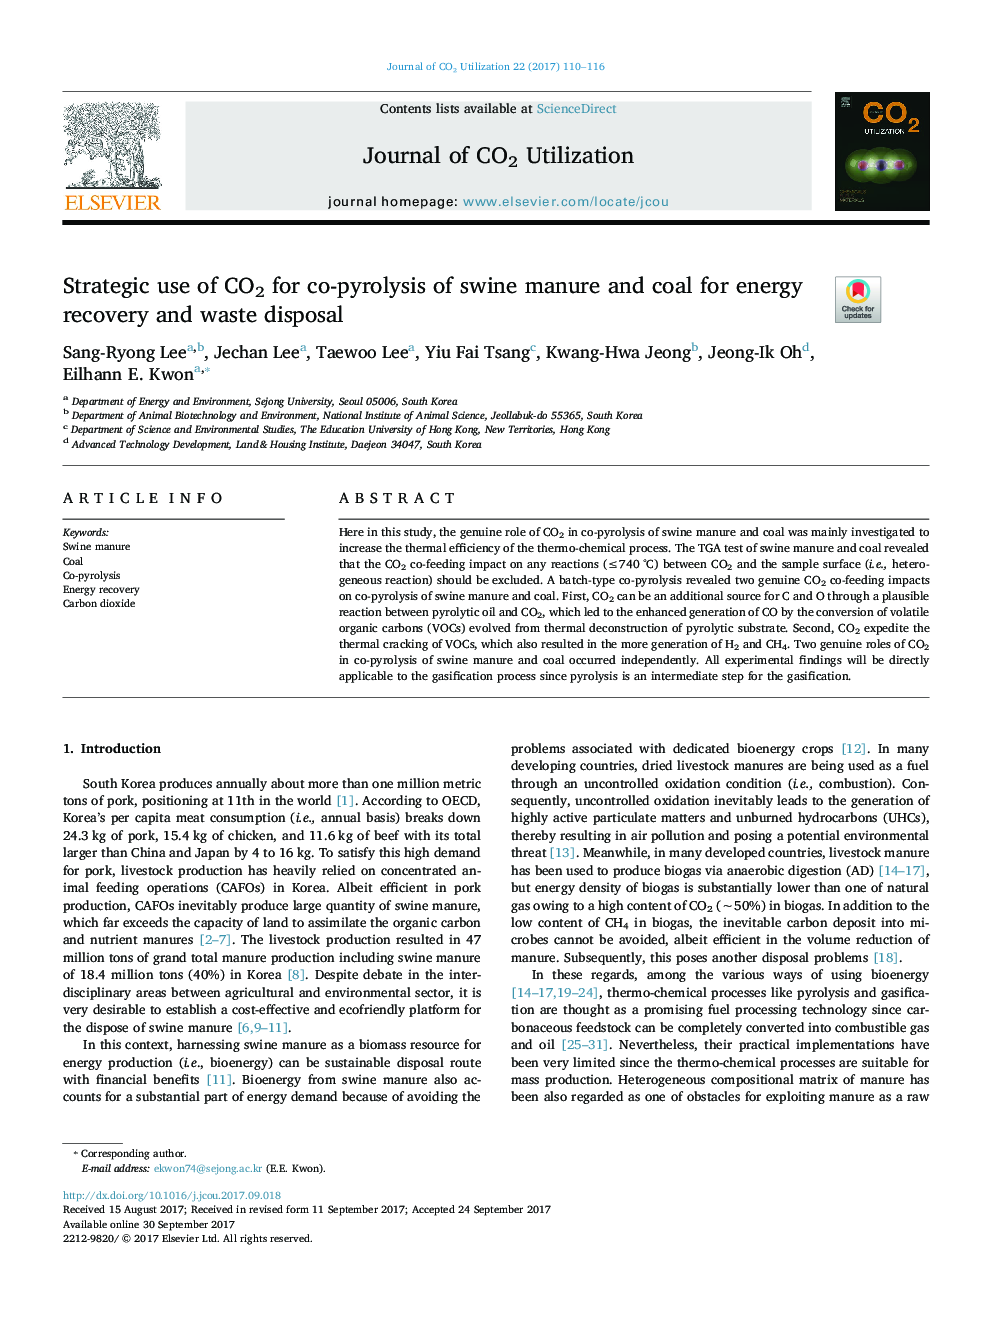 Strategic use of CO2 for co-pyrolysis of swine manure and coal for energy recovery and waste disposal